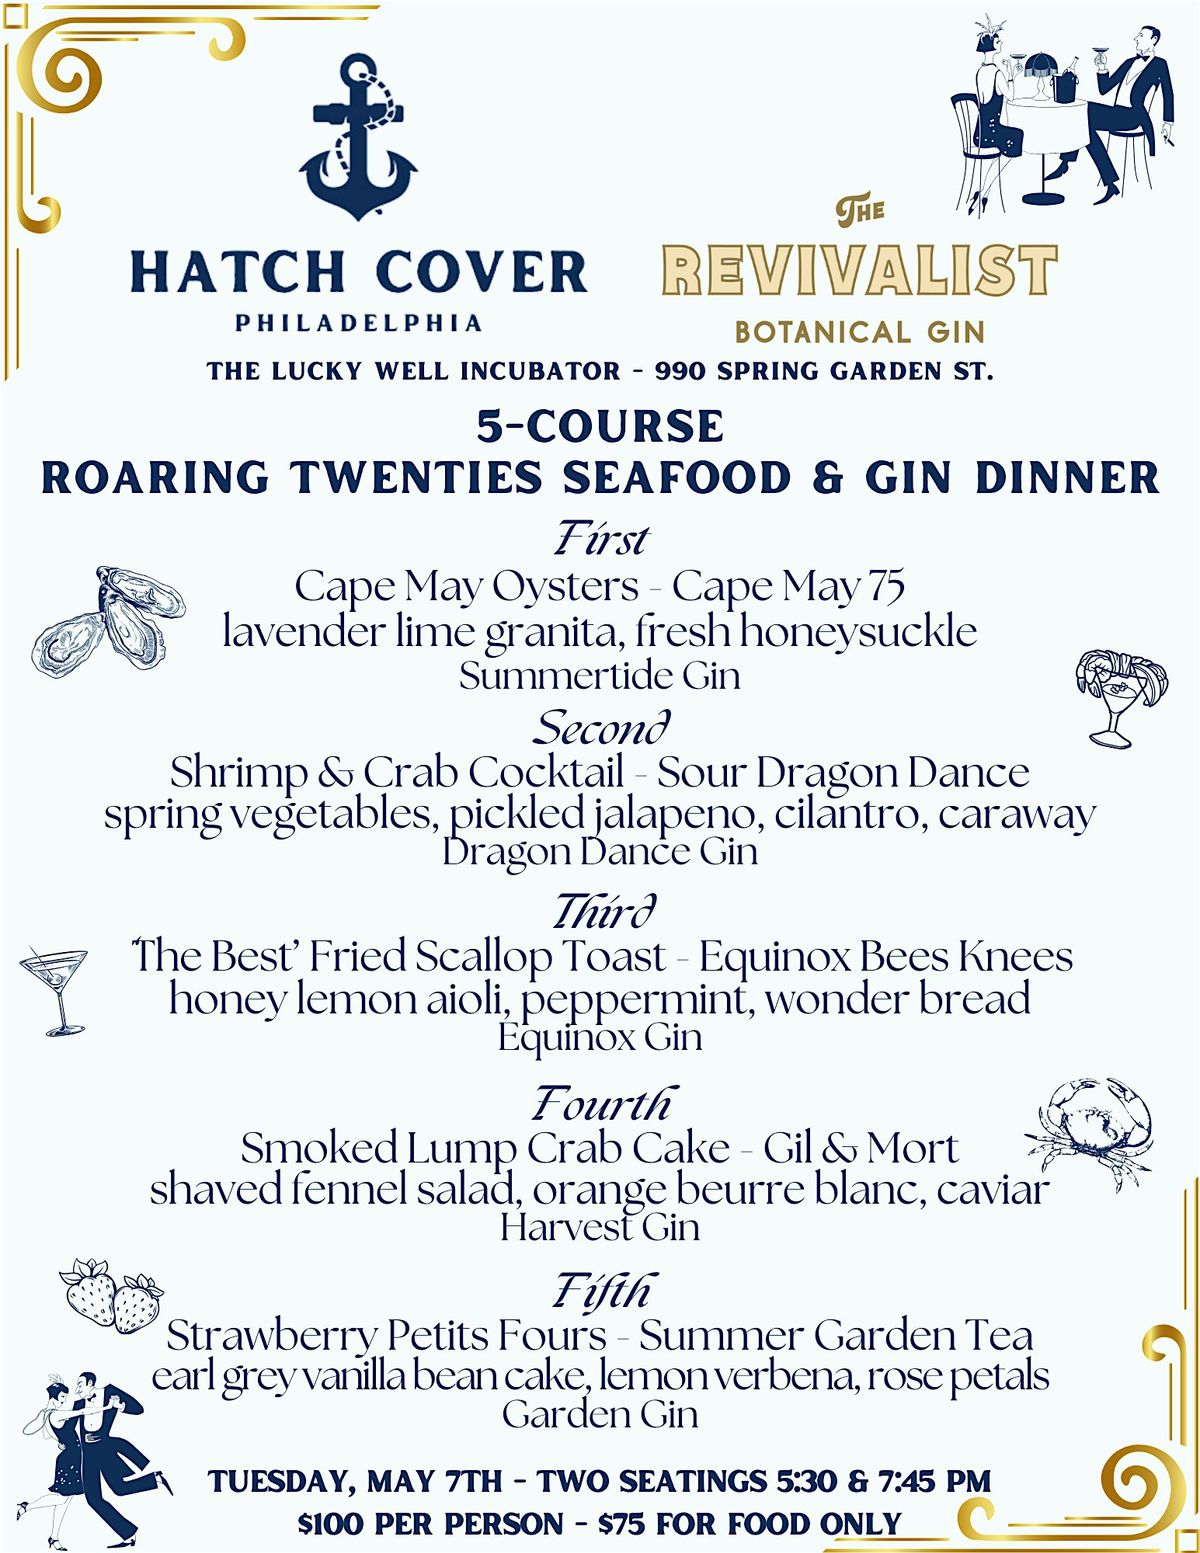 Hatch Cover & The Revivalist Botanical Gin- Roaring 20s Seafood Dinner!